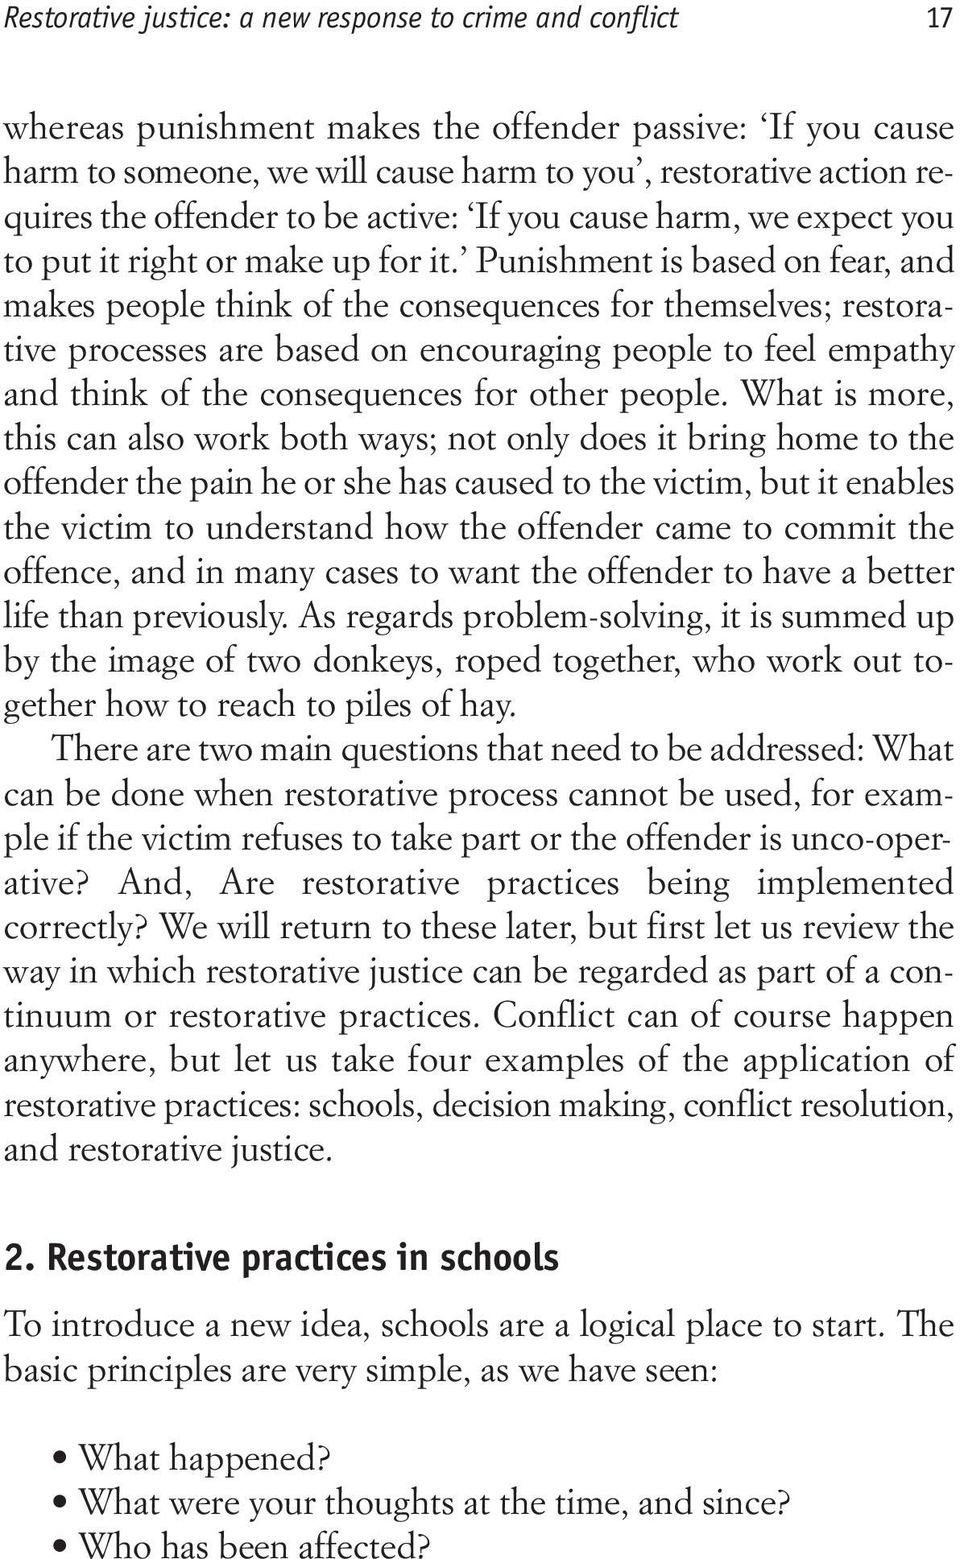 Punishment is based on fear, and makes people think of the consequences for themselves; restorative processes are based on encouraging people to feel empathy and think of the consequences for other